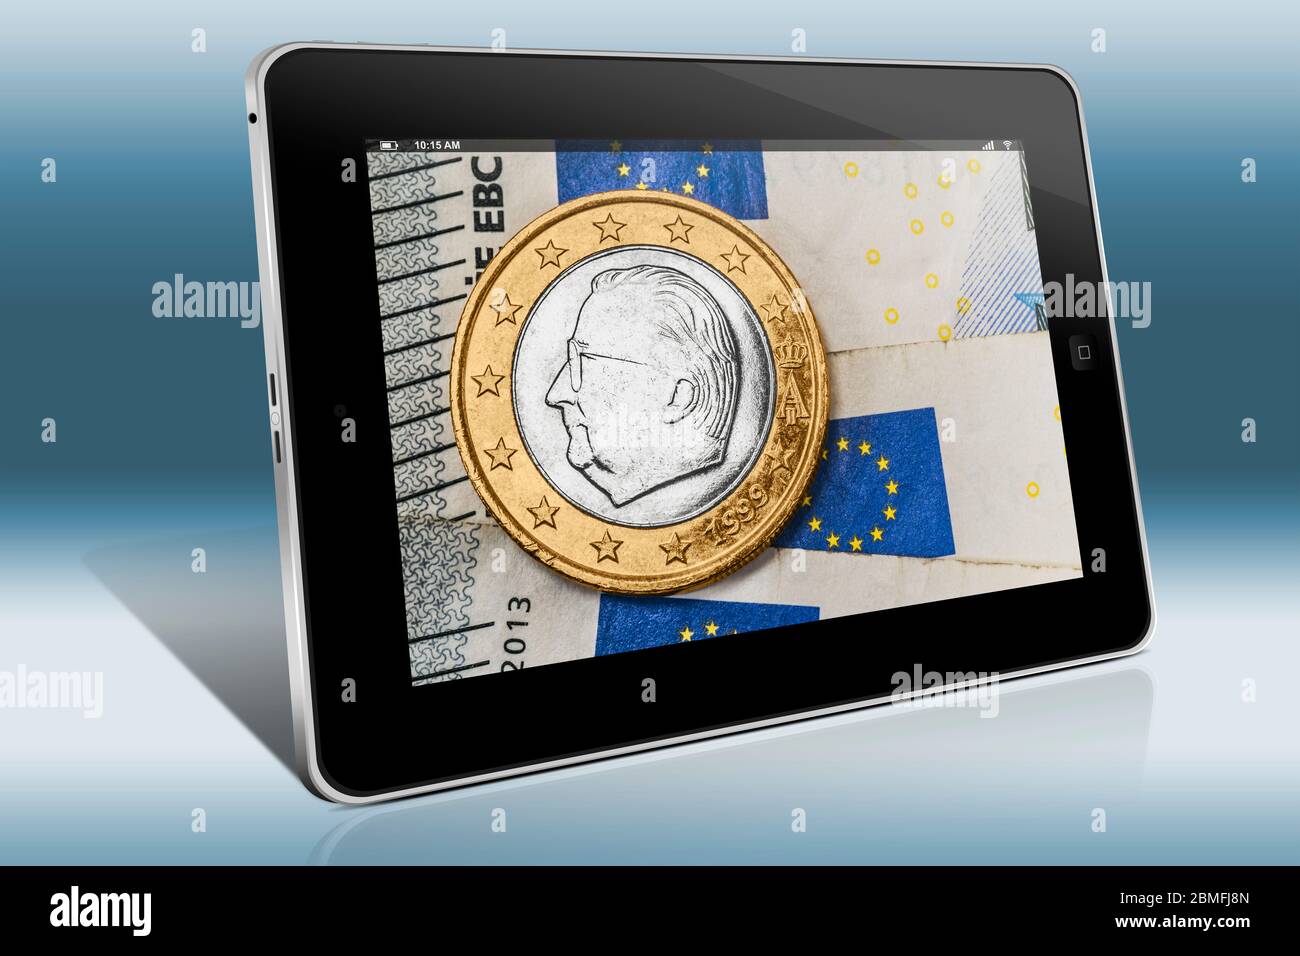 a 1 euro coin from Belgium on euro banknotes, view on a Tablet PC Stock Photo